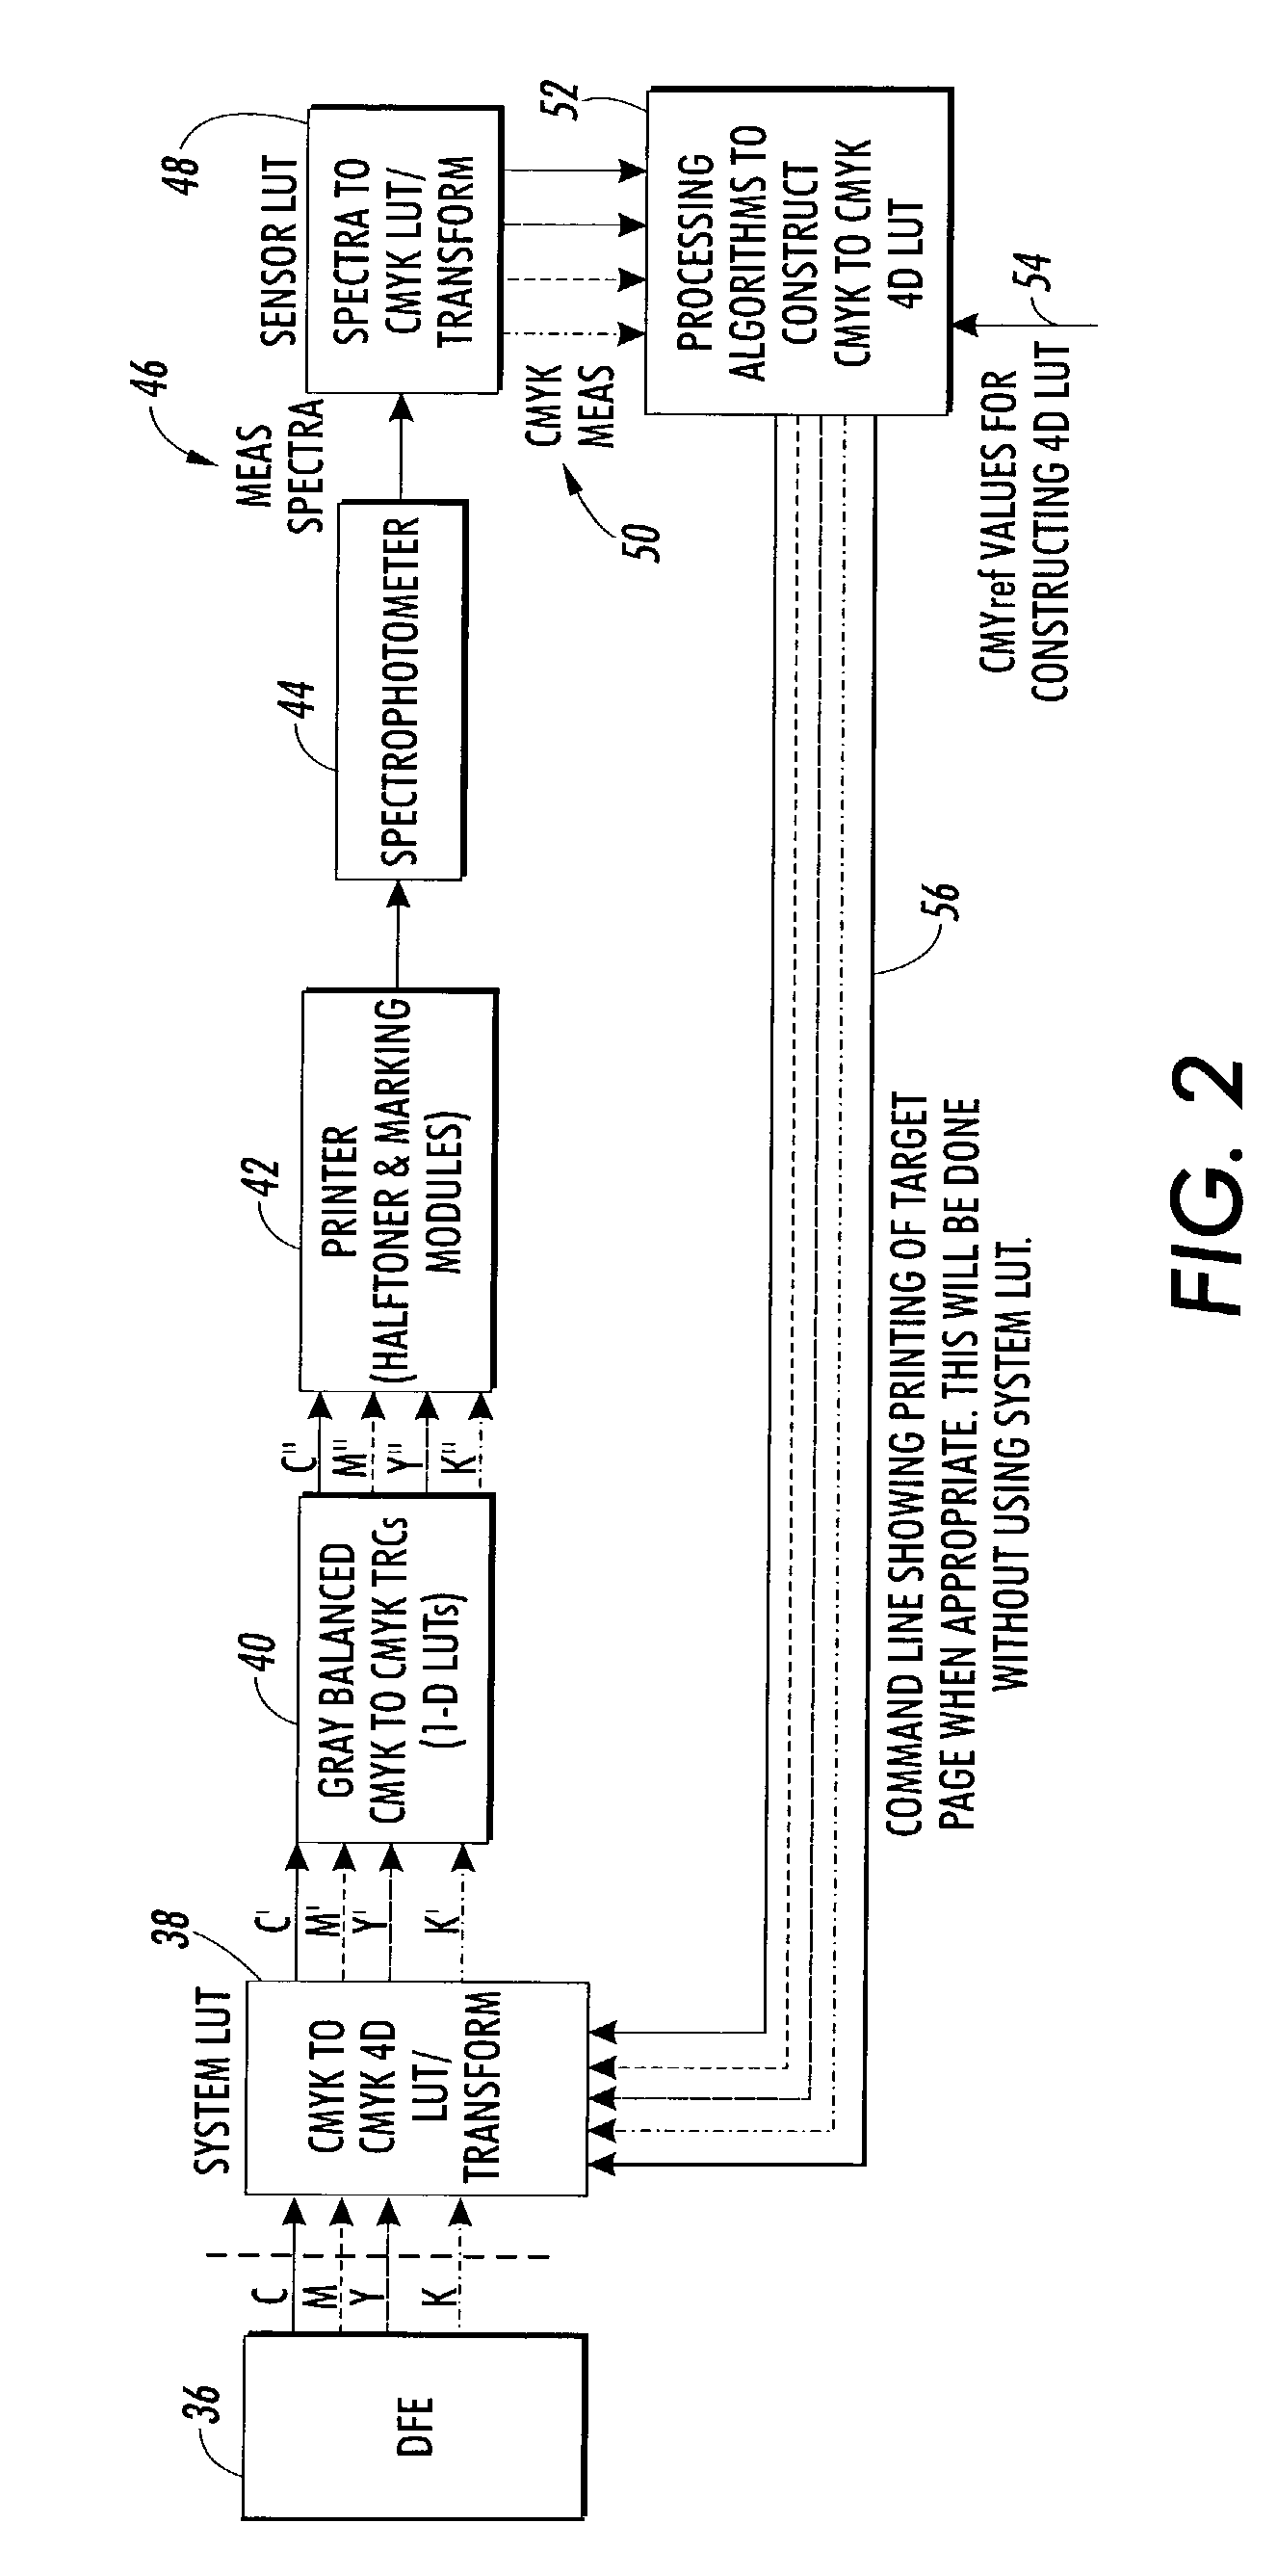 Method for standardizing input CMYK values for clustered printing environments